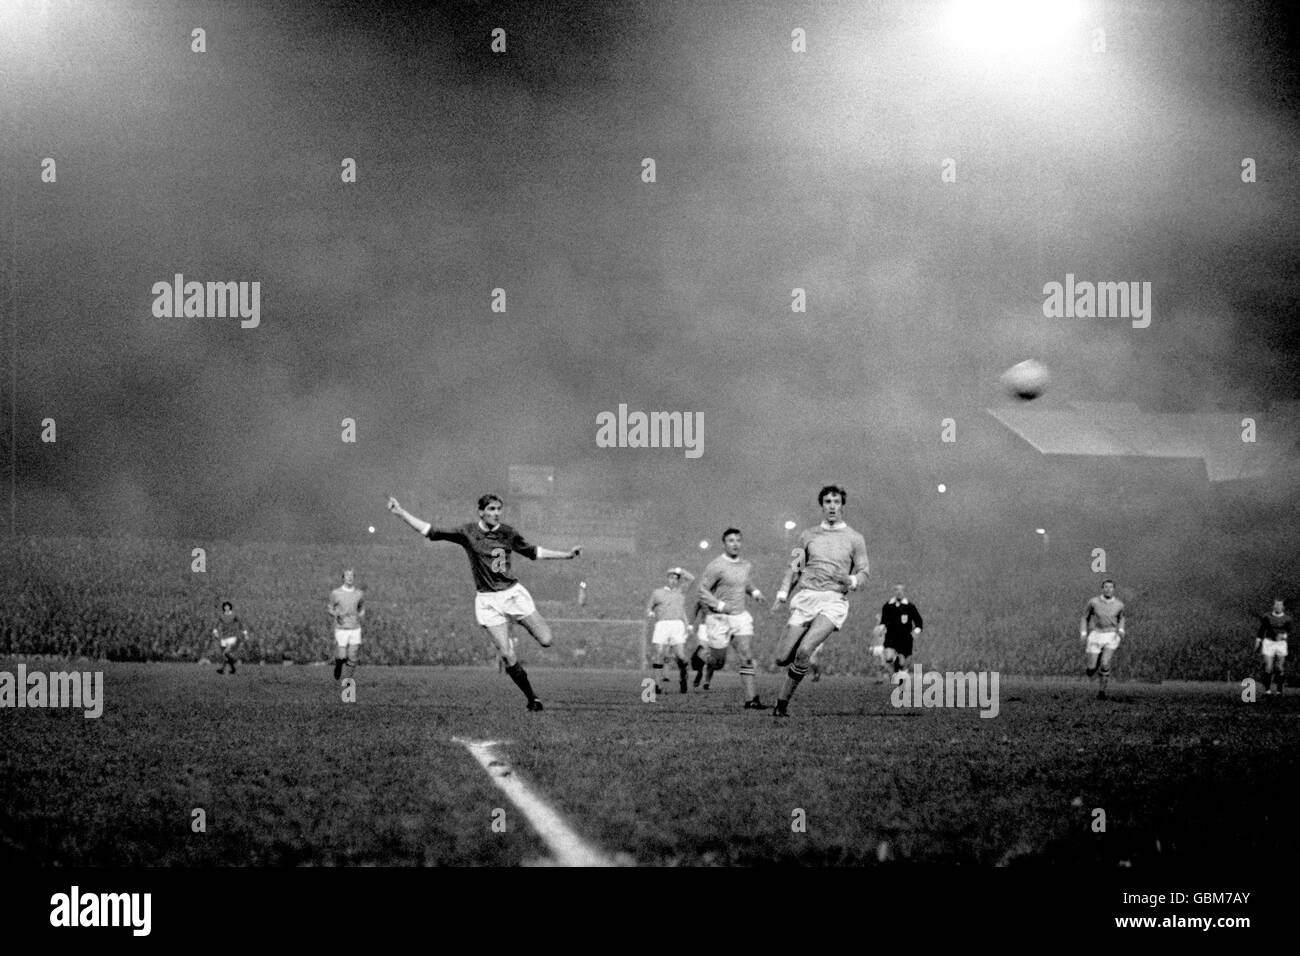 Manchester United's Paul Edwards (l) fires home his team's first goal, watched by Manchester City's Tommy Booth (r) Stock Photo